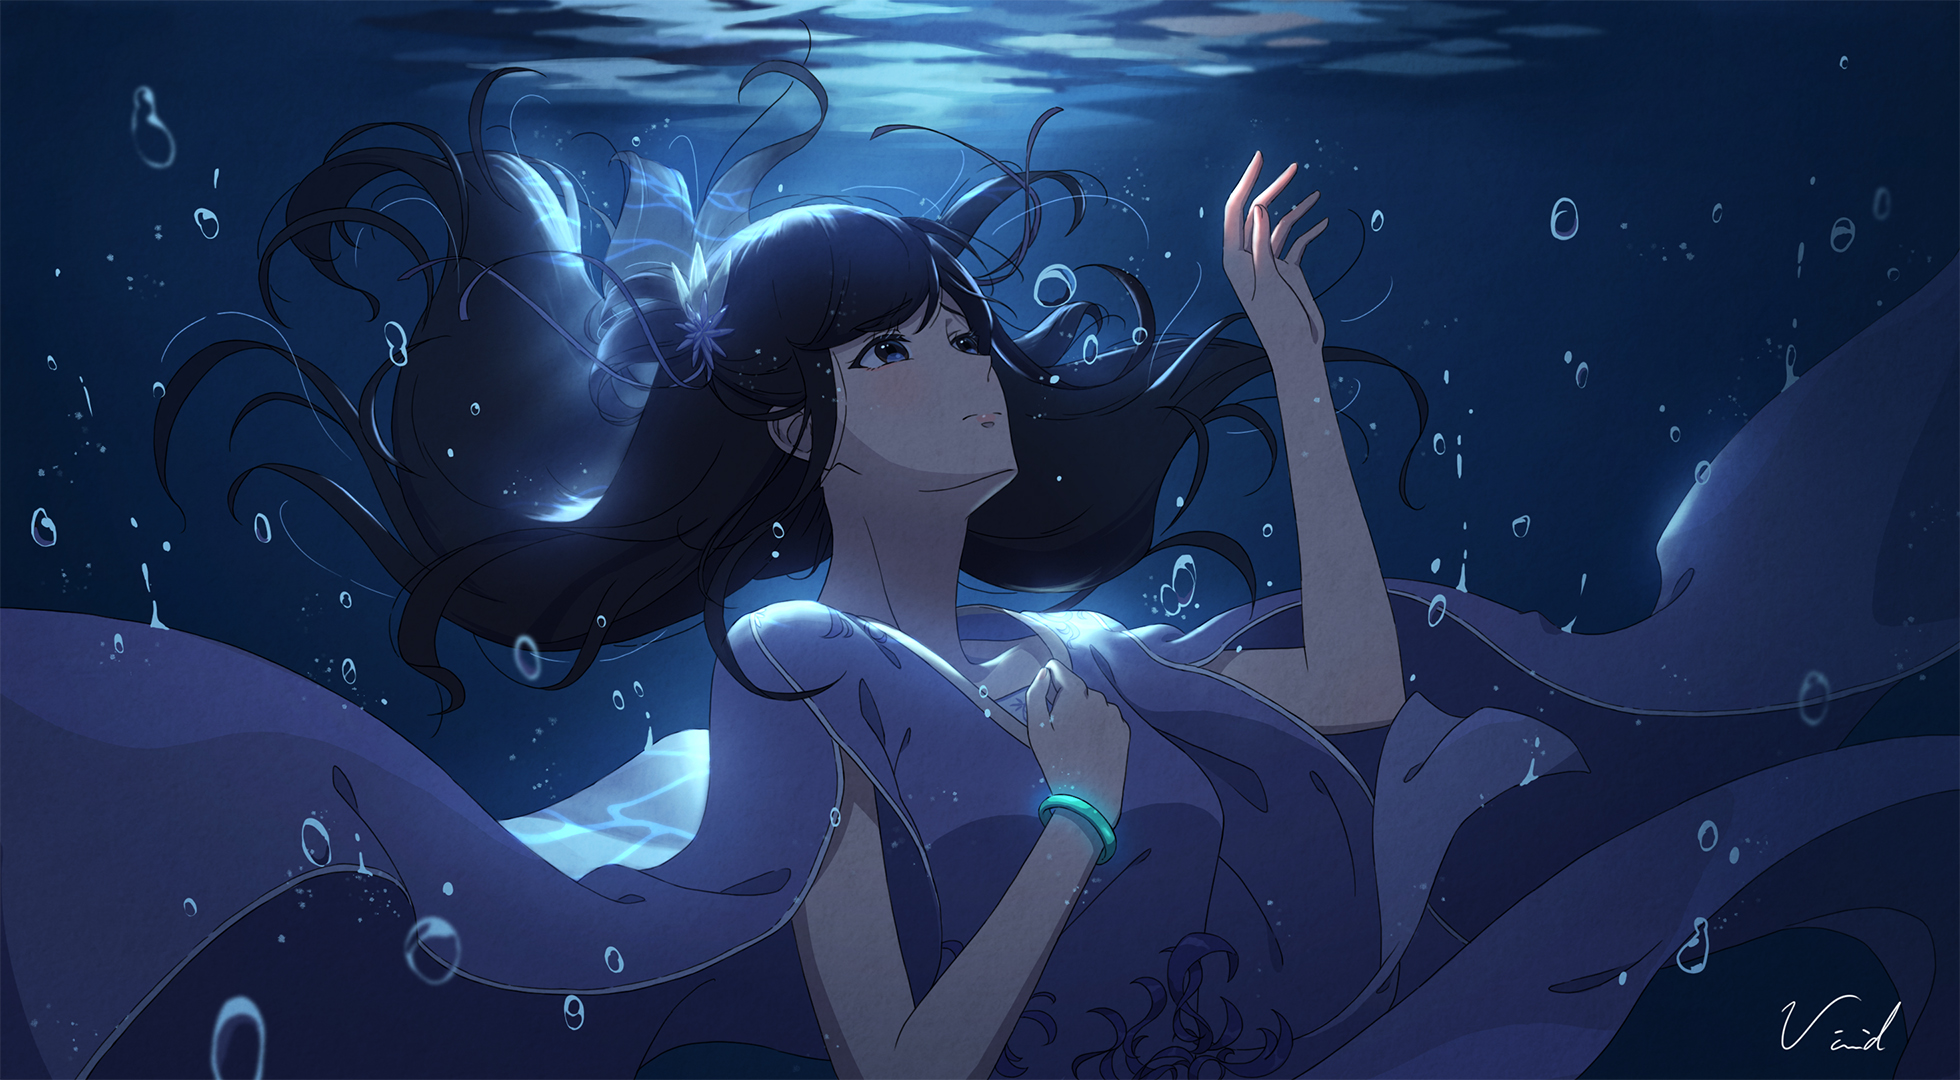 Anime girl floating underwater surrounded by bubbles by Vivid